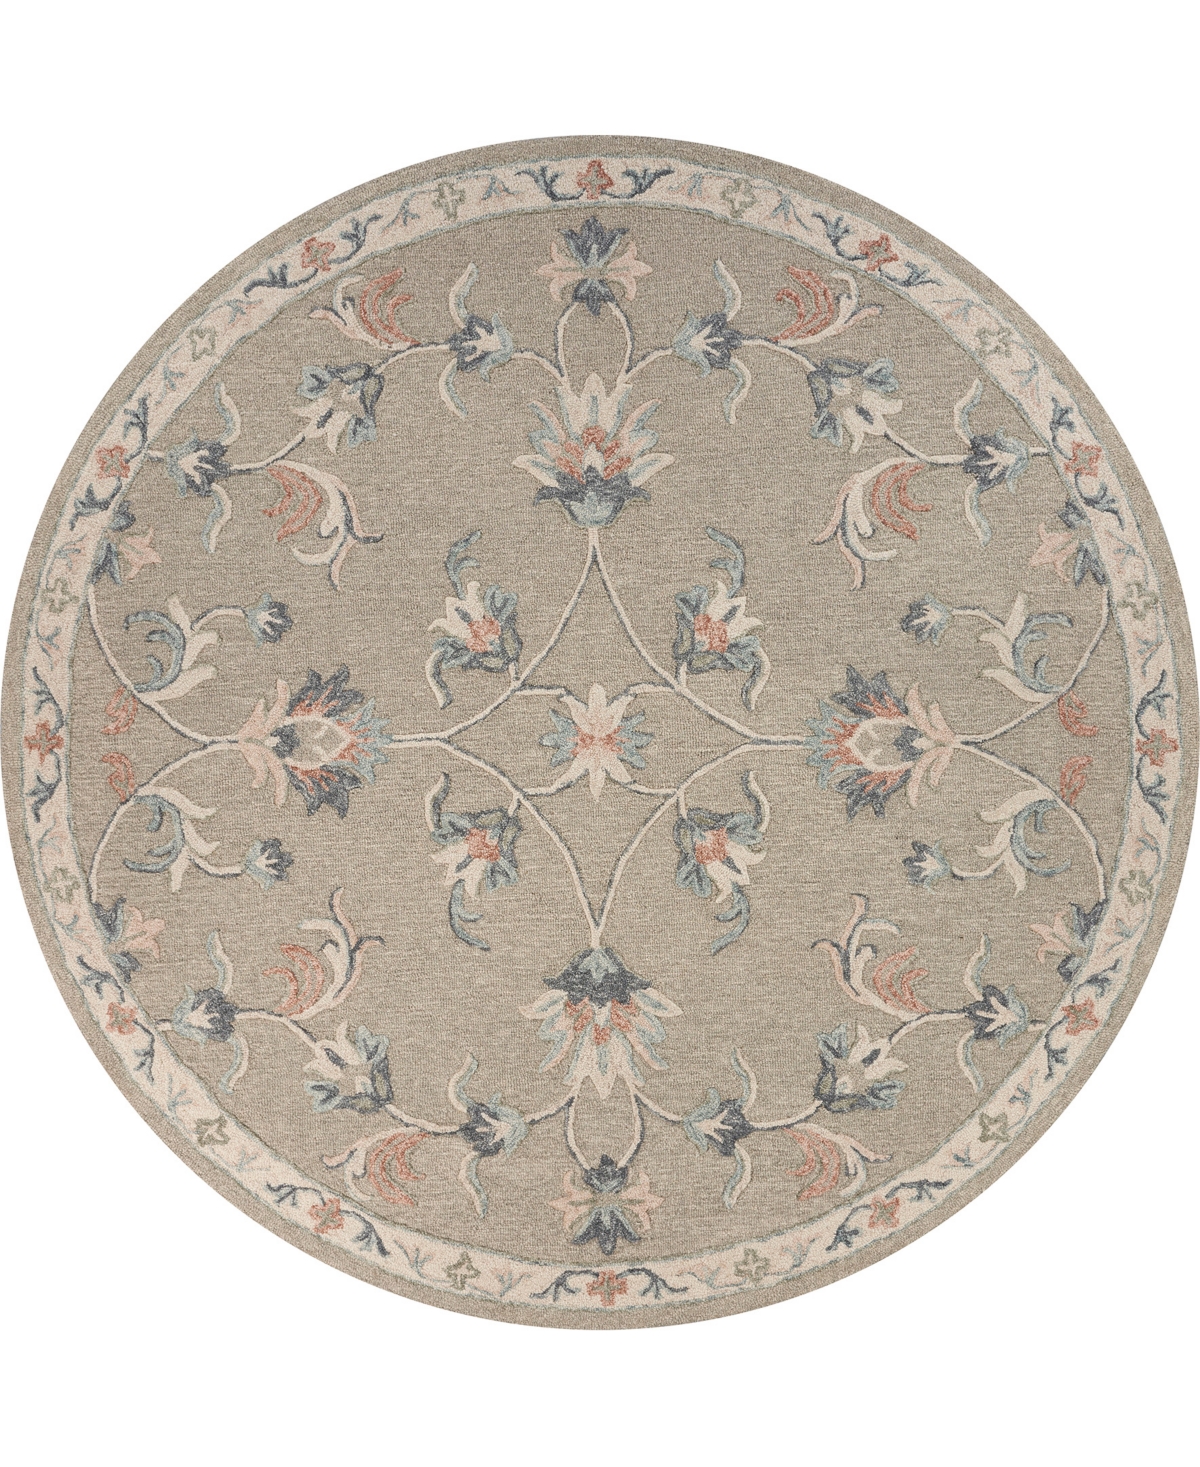 Lr Home Valiant Valnt81585 7'3" X 7'3" Round Area Rug In Silver